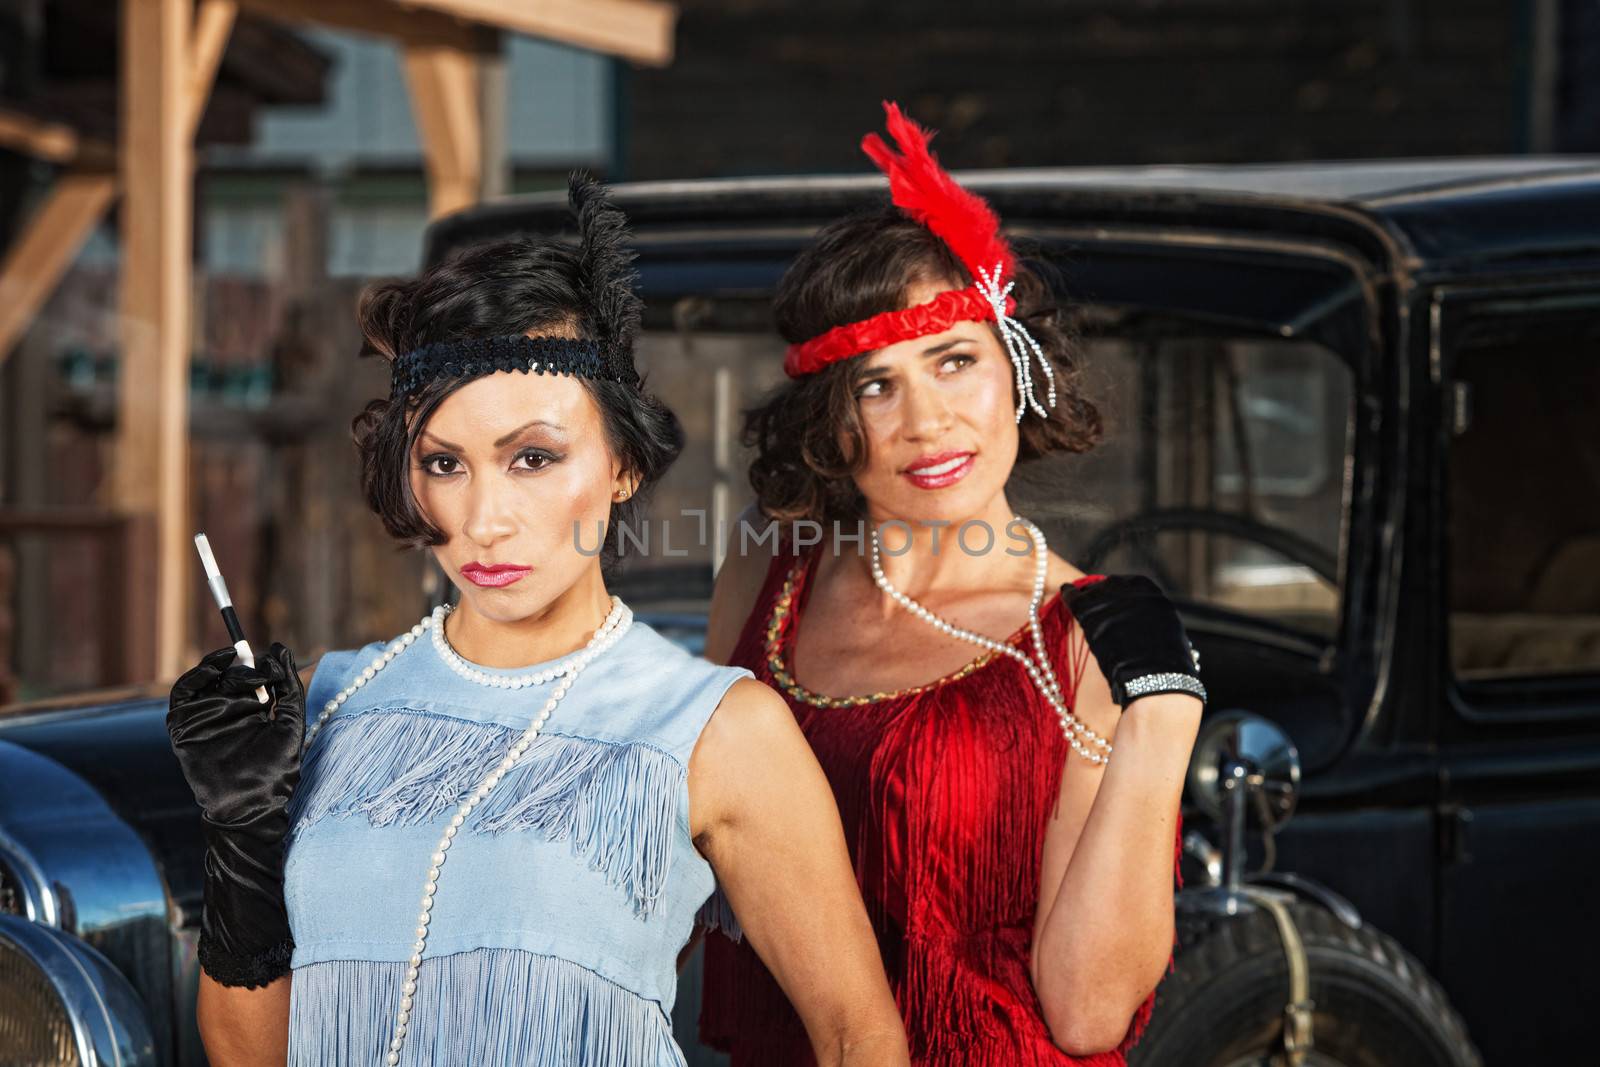 1920s flapper girls with cigarette near vintage automobile